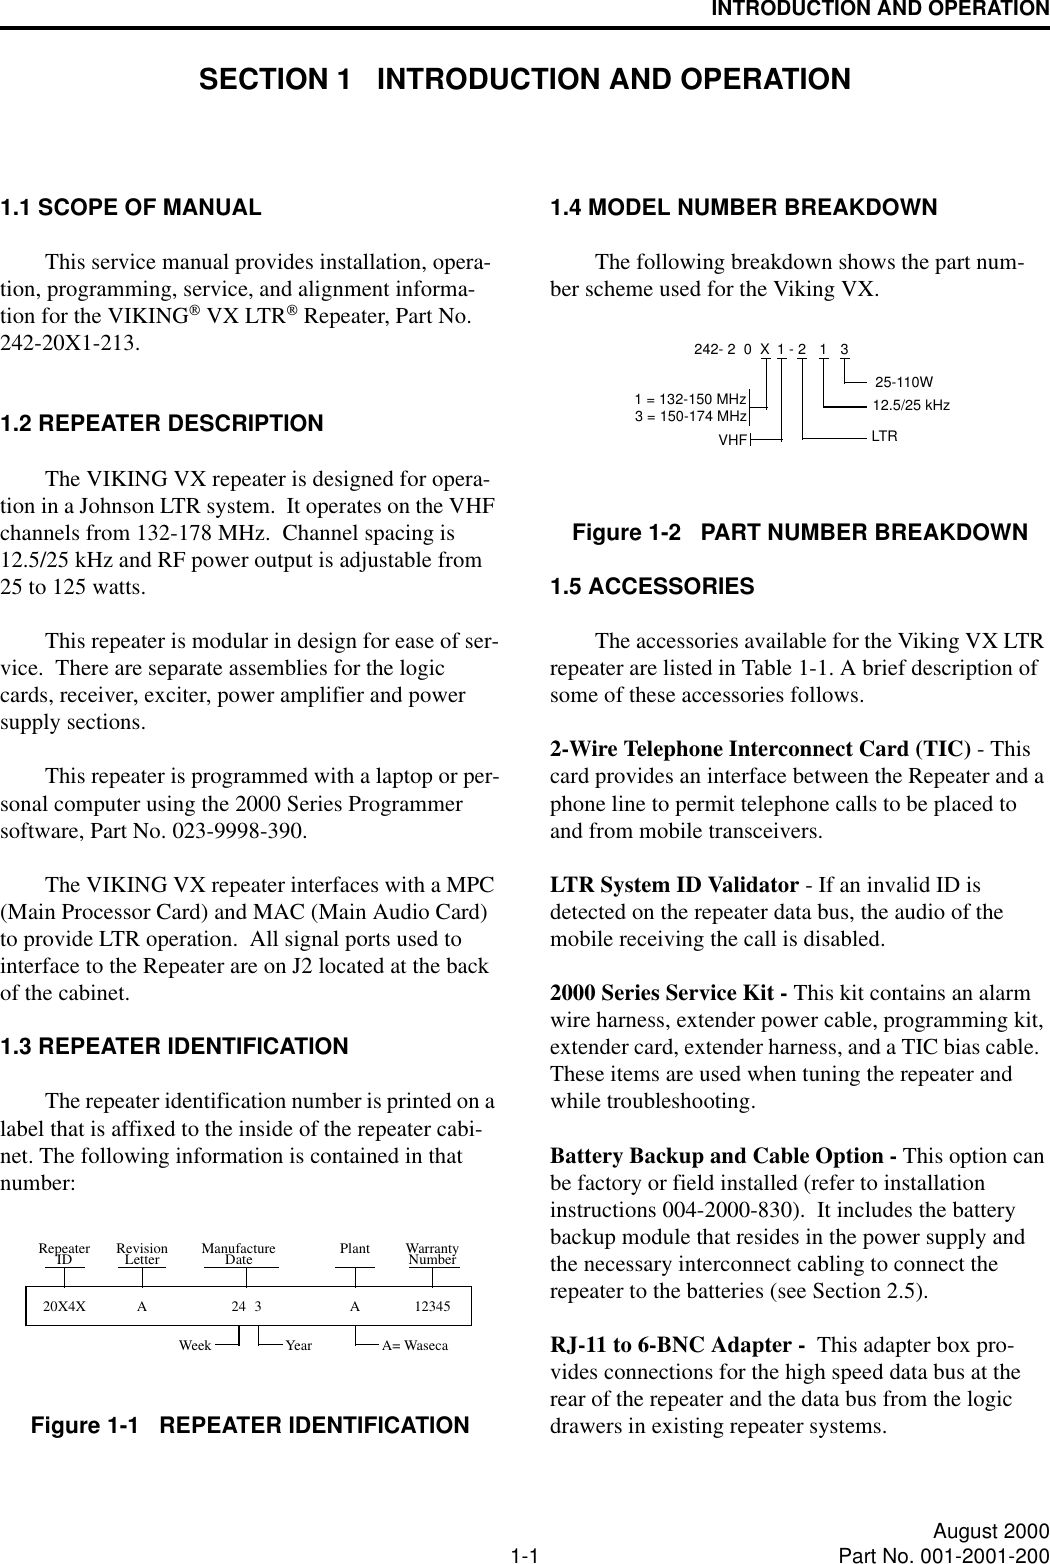 1-1 August 2000Part No. 001-2001-200INTRODUCTION AND OPERATIONSECTION 1   INTRODUCTION AND OPERATION1.1 SCOPE OF MANUALThis service manual provides installation, opera-tion, programming, service, and alignment informa-tion for the VIKING VX LTR Repeater, Part No. 242-20X1-213.1.2 REPEATER DESCRIPTIONThe VIKING VX repeater is designed for opera-tion in a Johnson LTR system.  It operates on the VHF channels from 132-178 MHz.  Channel spacing is 12.5/25 kHz and RF power output is adjustable from 25 to 125 watts.This repeater is modular in design for ease of ser-vice.  There are separate assemblies for the logic cards, receiver, exciter, power amplifier and power supply sections.This repeater is programmed with a laptop or per-sonal computer using the 2000 Series Programmer software, Part No. 023-9998-390.The VIKING VX repeater interfaces with a MPC (Main Processor Card) and MAC (Main Audio Card) to provide LTR operation.  All signal ports used to interface to the Repeater are on J2 located at the back of the cabinet.1.3 REPEATER IDENTIFICATIONThe repeater identification number is printed on a label that is affixed to the inside of the repeater cabi-net. The following information is contained in that number:Figure 1-1   REPEATER IDENTIFICATION20X4XWeek Year A= WasecaNumberWarrantyPlantDateManufactureLetterRevision12345A324ARepeaterID1.4 MODEL NUMBER BREAKDOWNThe following breakdown shows the part num-ber scheme used for the Viking VX.Figure 1-2   PART NUMBER BREAKDOWN1.5 ACCESSORIESThe accessories available for the Viking VX LTR repeater are listed in Table 1-1. A brief description of some of these accessories follows. 2-Wire Telephone Interconnect Card (TIC) - This card provides an interface between the Repeater and a phone line to permit telephone calls to be placed to and from mobile transceivers.LTR System ID Validator - If an invalid ID is detected on the repeater data bus, the audio of the mobile receiving the call is disabled.2000 Series Service Kit - This kit contains an alarm wire harness, extender power cable, programming kit, extender card, extender harness, and a TIC bias cable.  These items are used when tuning the repeater and while troubleshooting.Battery Backup and Cable Option - This option can be factory or field installed (refer to installation instructions 004-2000-830).  It includes the battery backup module that resides in the power supply and the necessary interconnect cabling to connect the repeater to the batteries (see Section 2.5).RJ-11 to 6-BNC Adapter -  This adapter box pro-vides connections for the high speed data bus at the rear of the repeater and the data bus from the logic drawers in existing repeater systems.3242- 2  0  X 1 -VHF112.5/25 kHz225-110W3 = 150-174 MHz1 = 132-150 MHzLTR